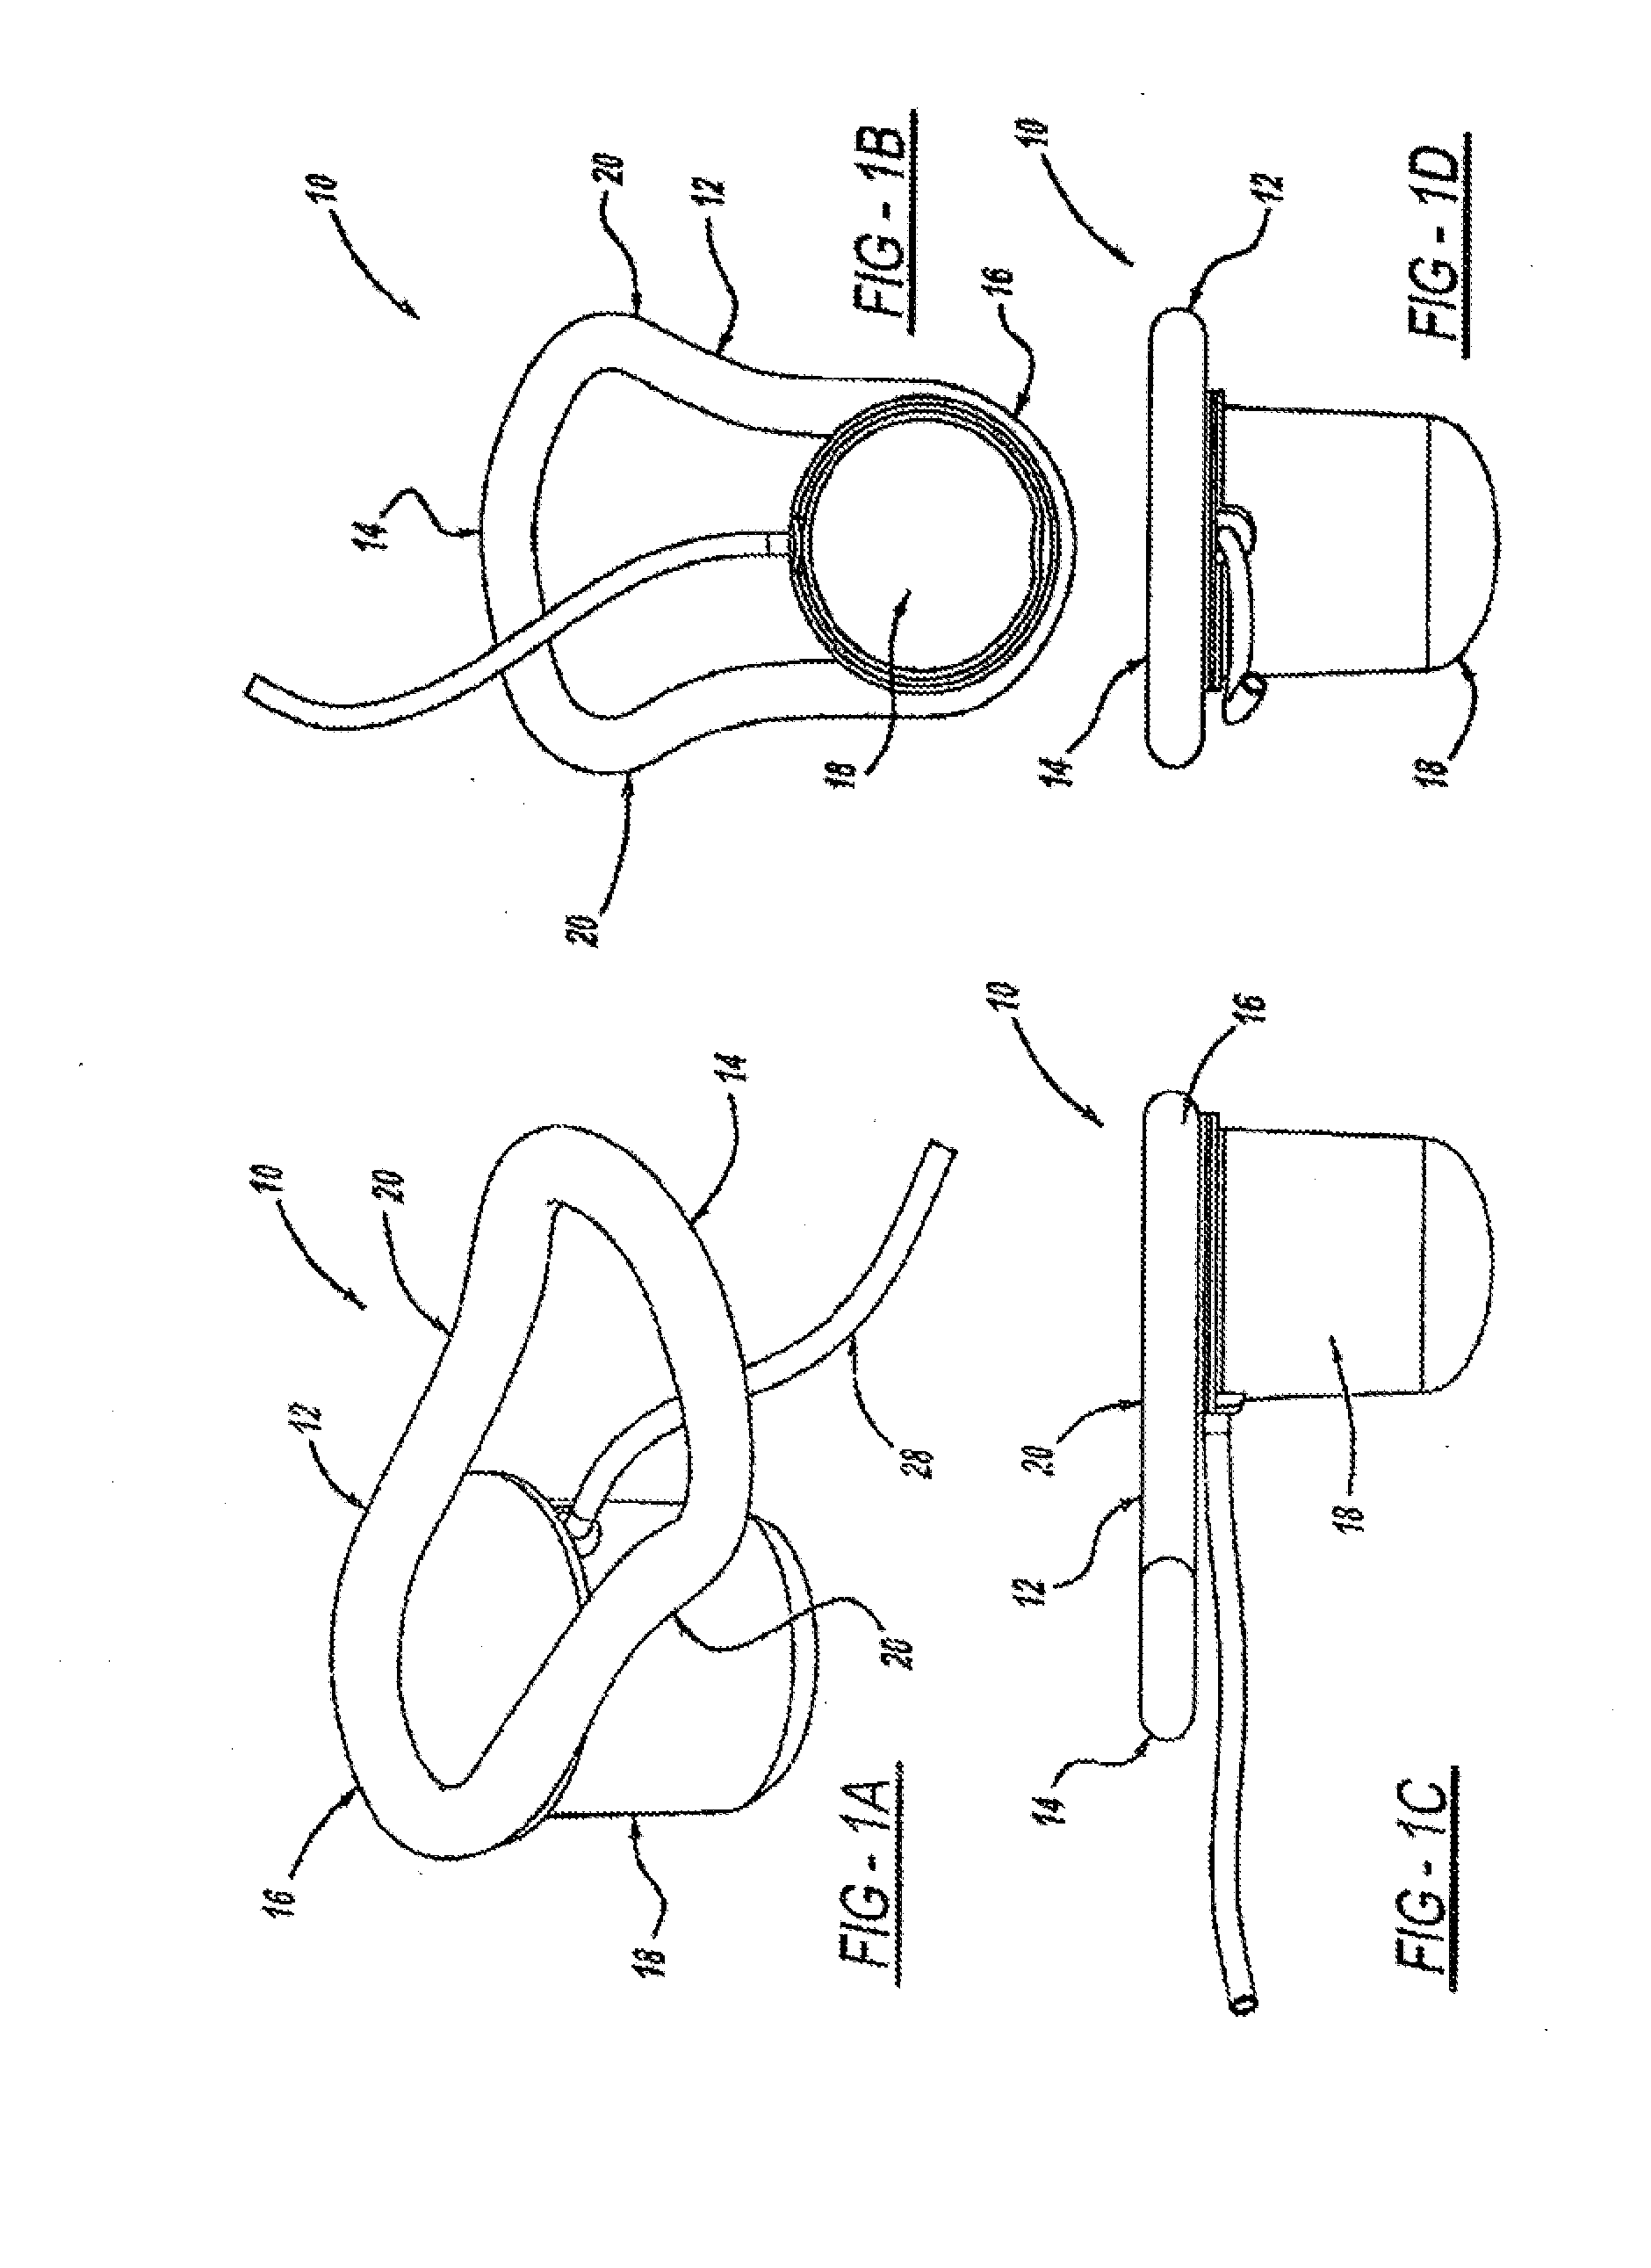 Intra-Vaginal Devices and Methods for Treating Fecal Incontinence